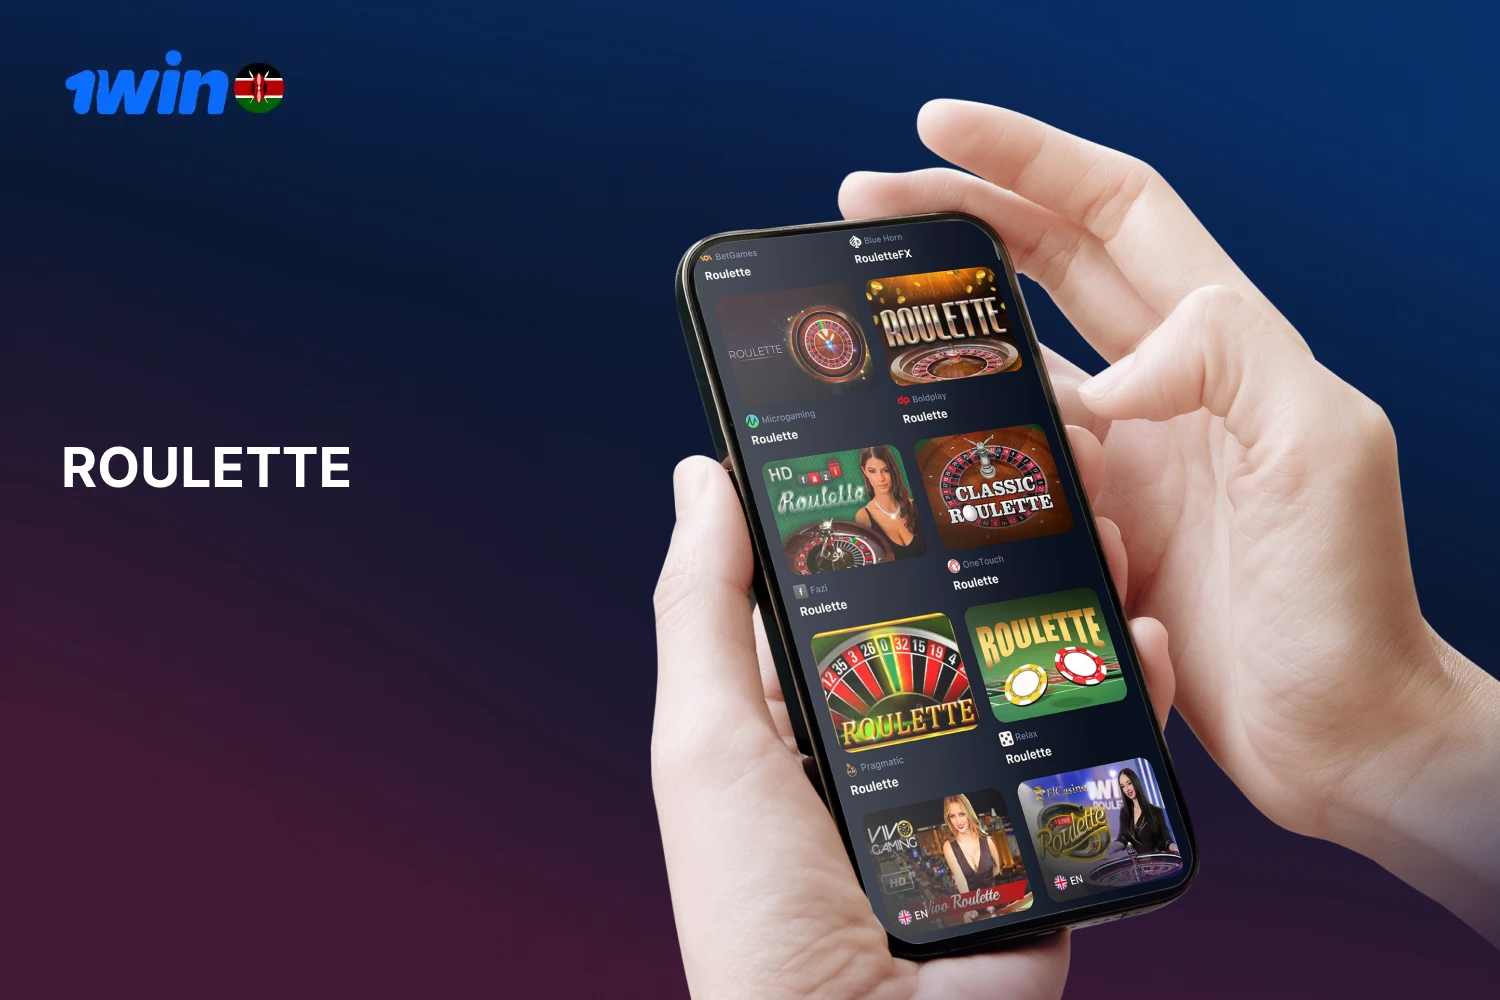 At the 1win website, players from Kenya can enjoy playing roulette for real money both at the table and online